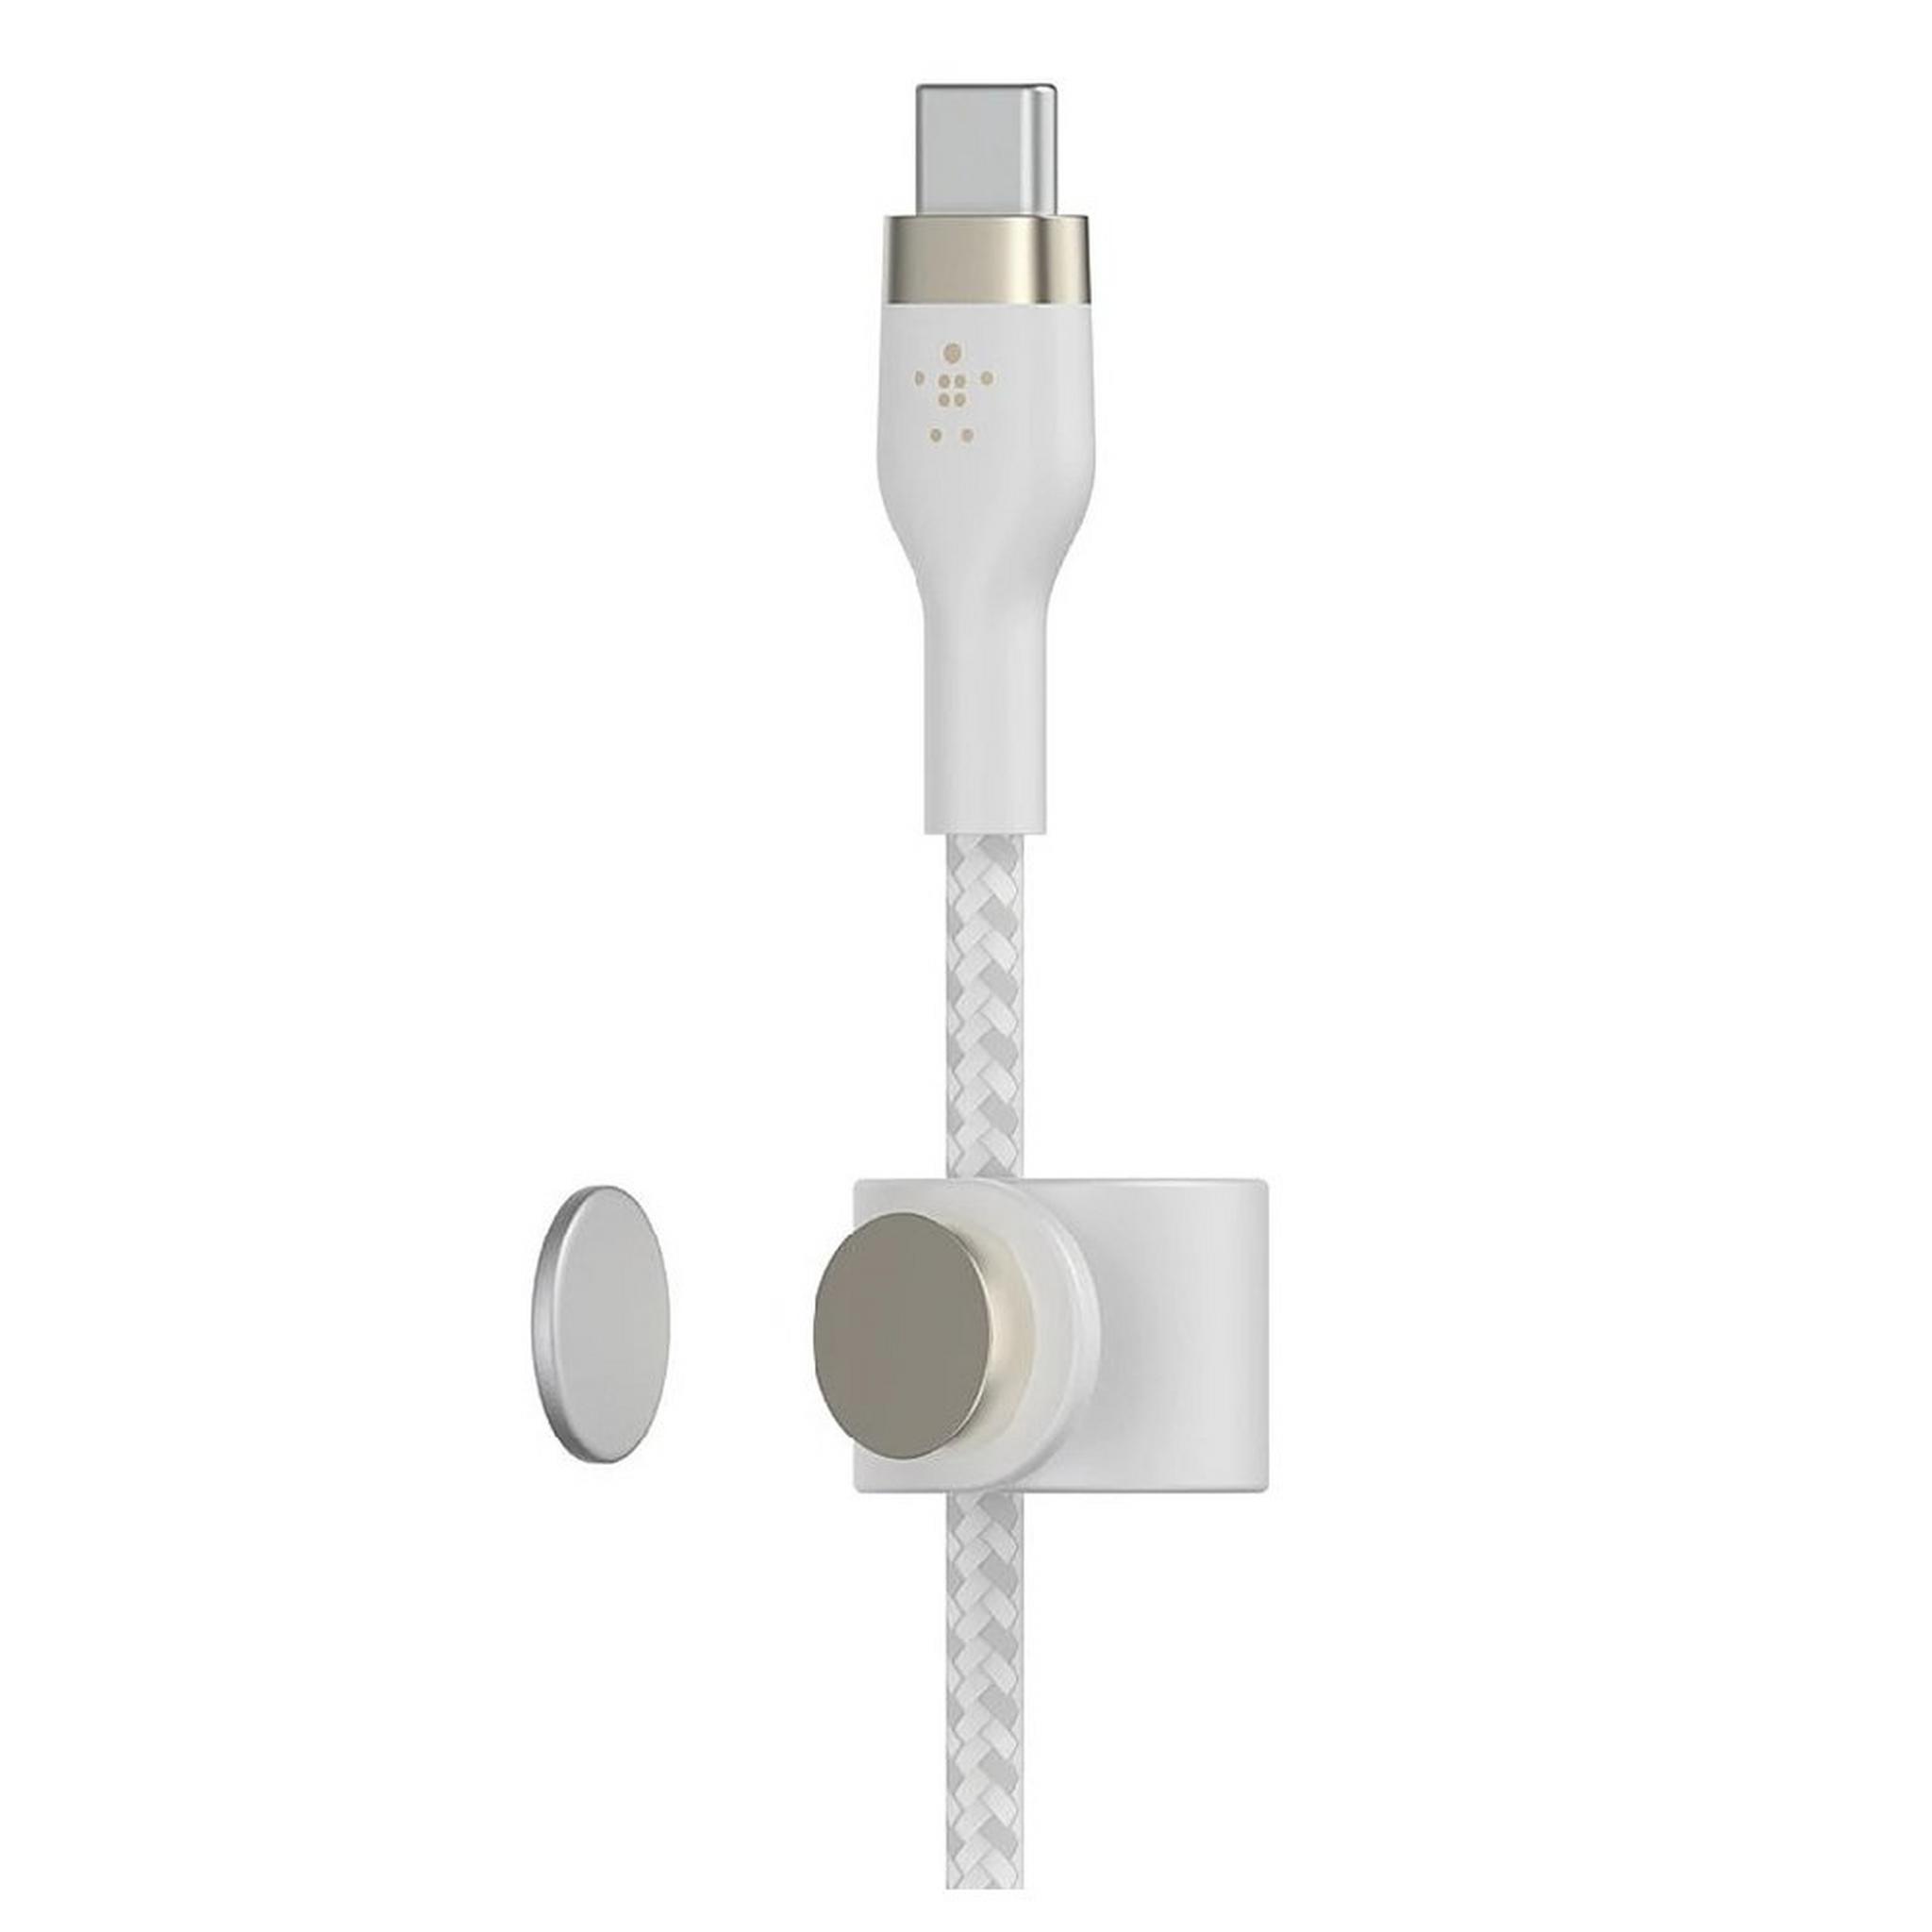 Belkin BoostCharge Pro Flex Braided USB C Charger Cable, CAB011bt3MWH – White